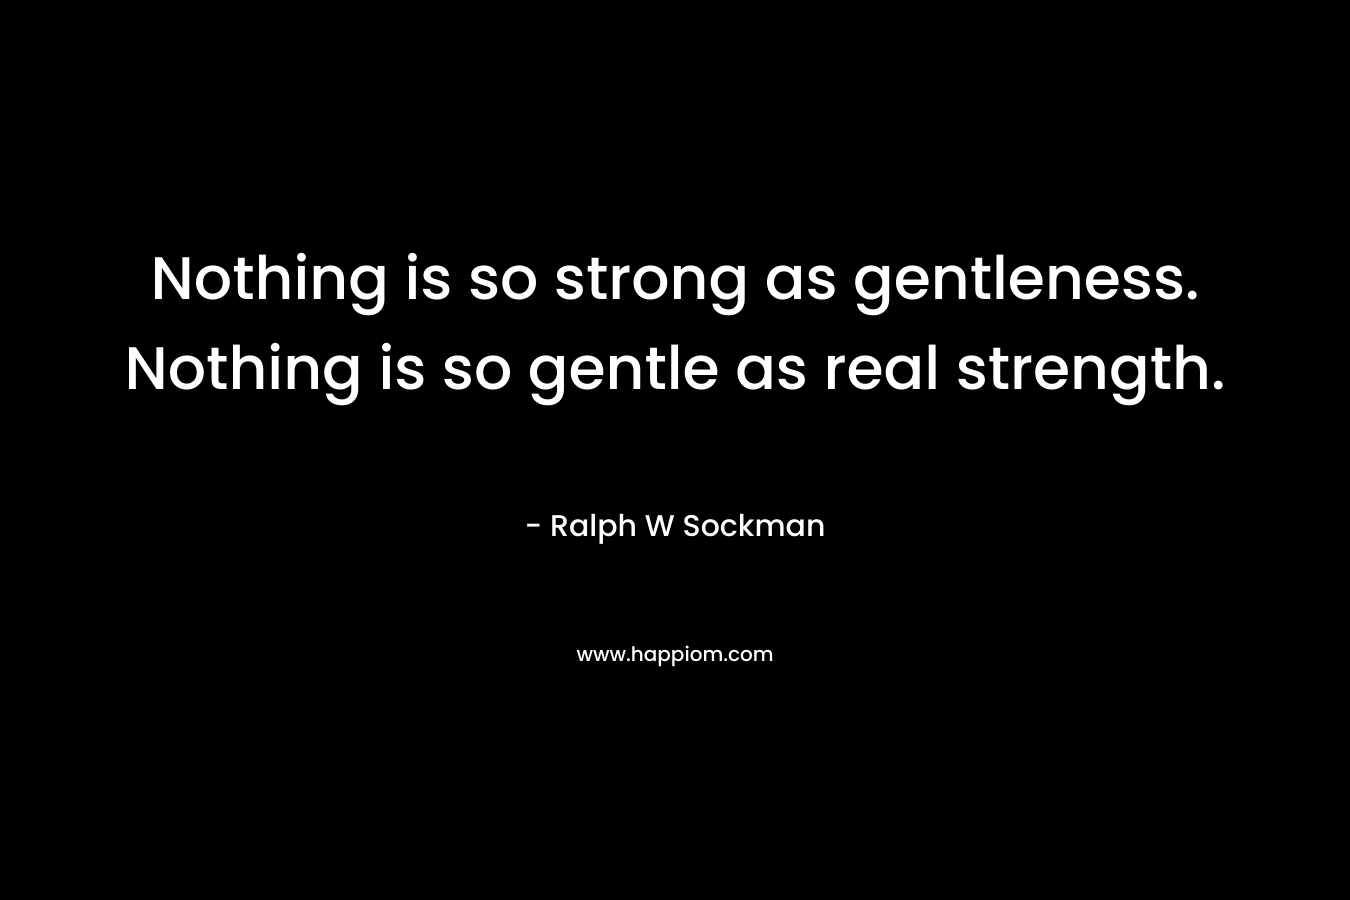 Nothing is so strong as gentleness. Nothing is so gentle as real strength. – Ralph W Sockman